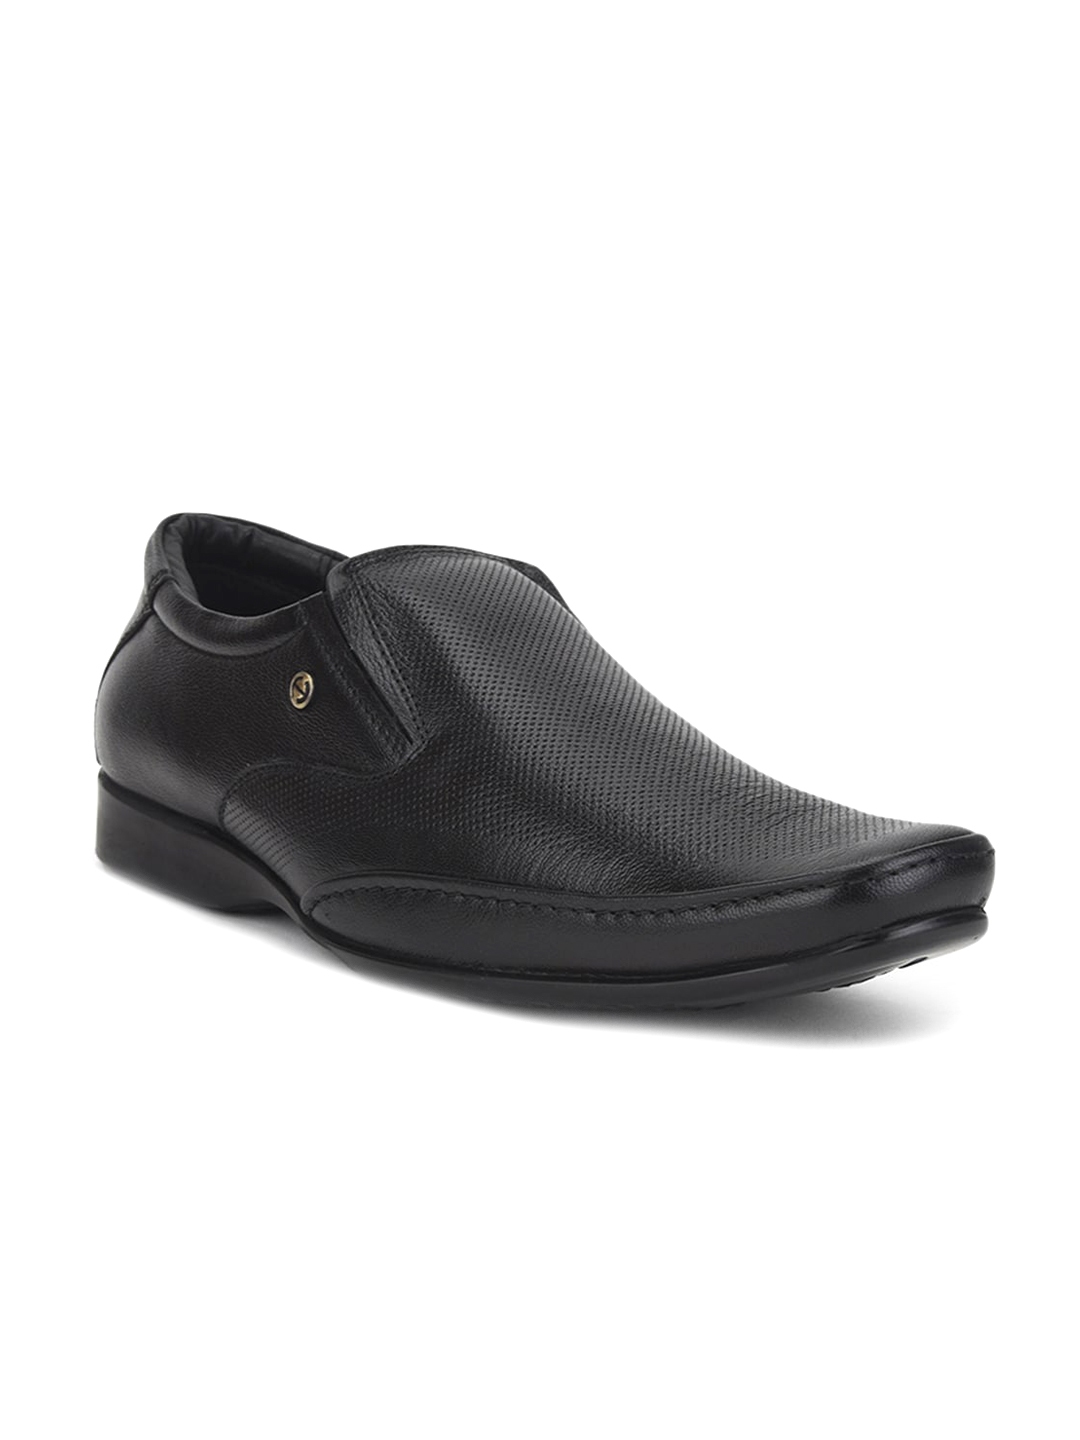 Buy Liberty Men Textured Formal Leather Slip On Shoes Formal Shoes For Men 20190332 Myntra 6223